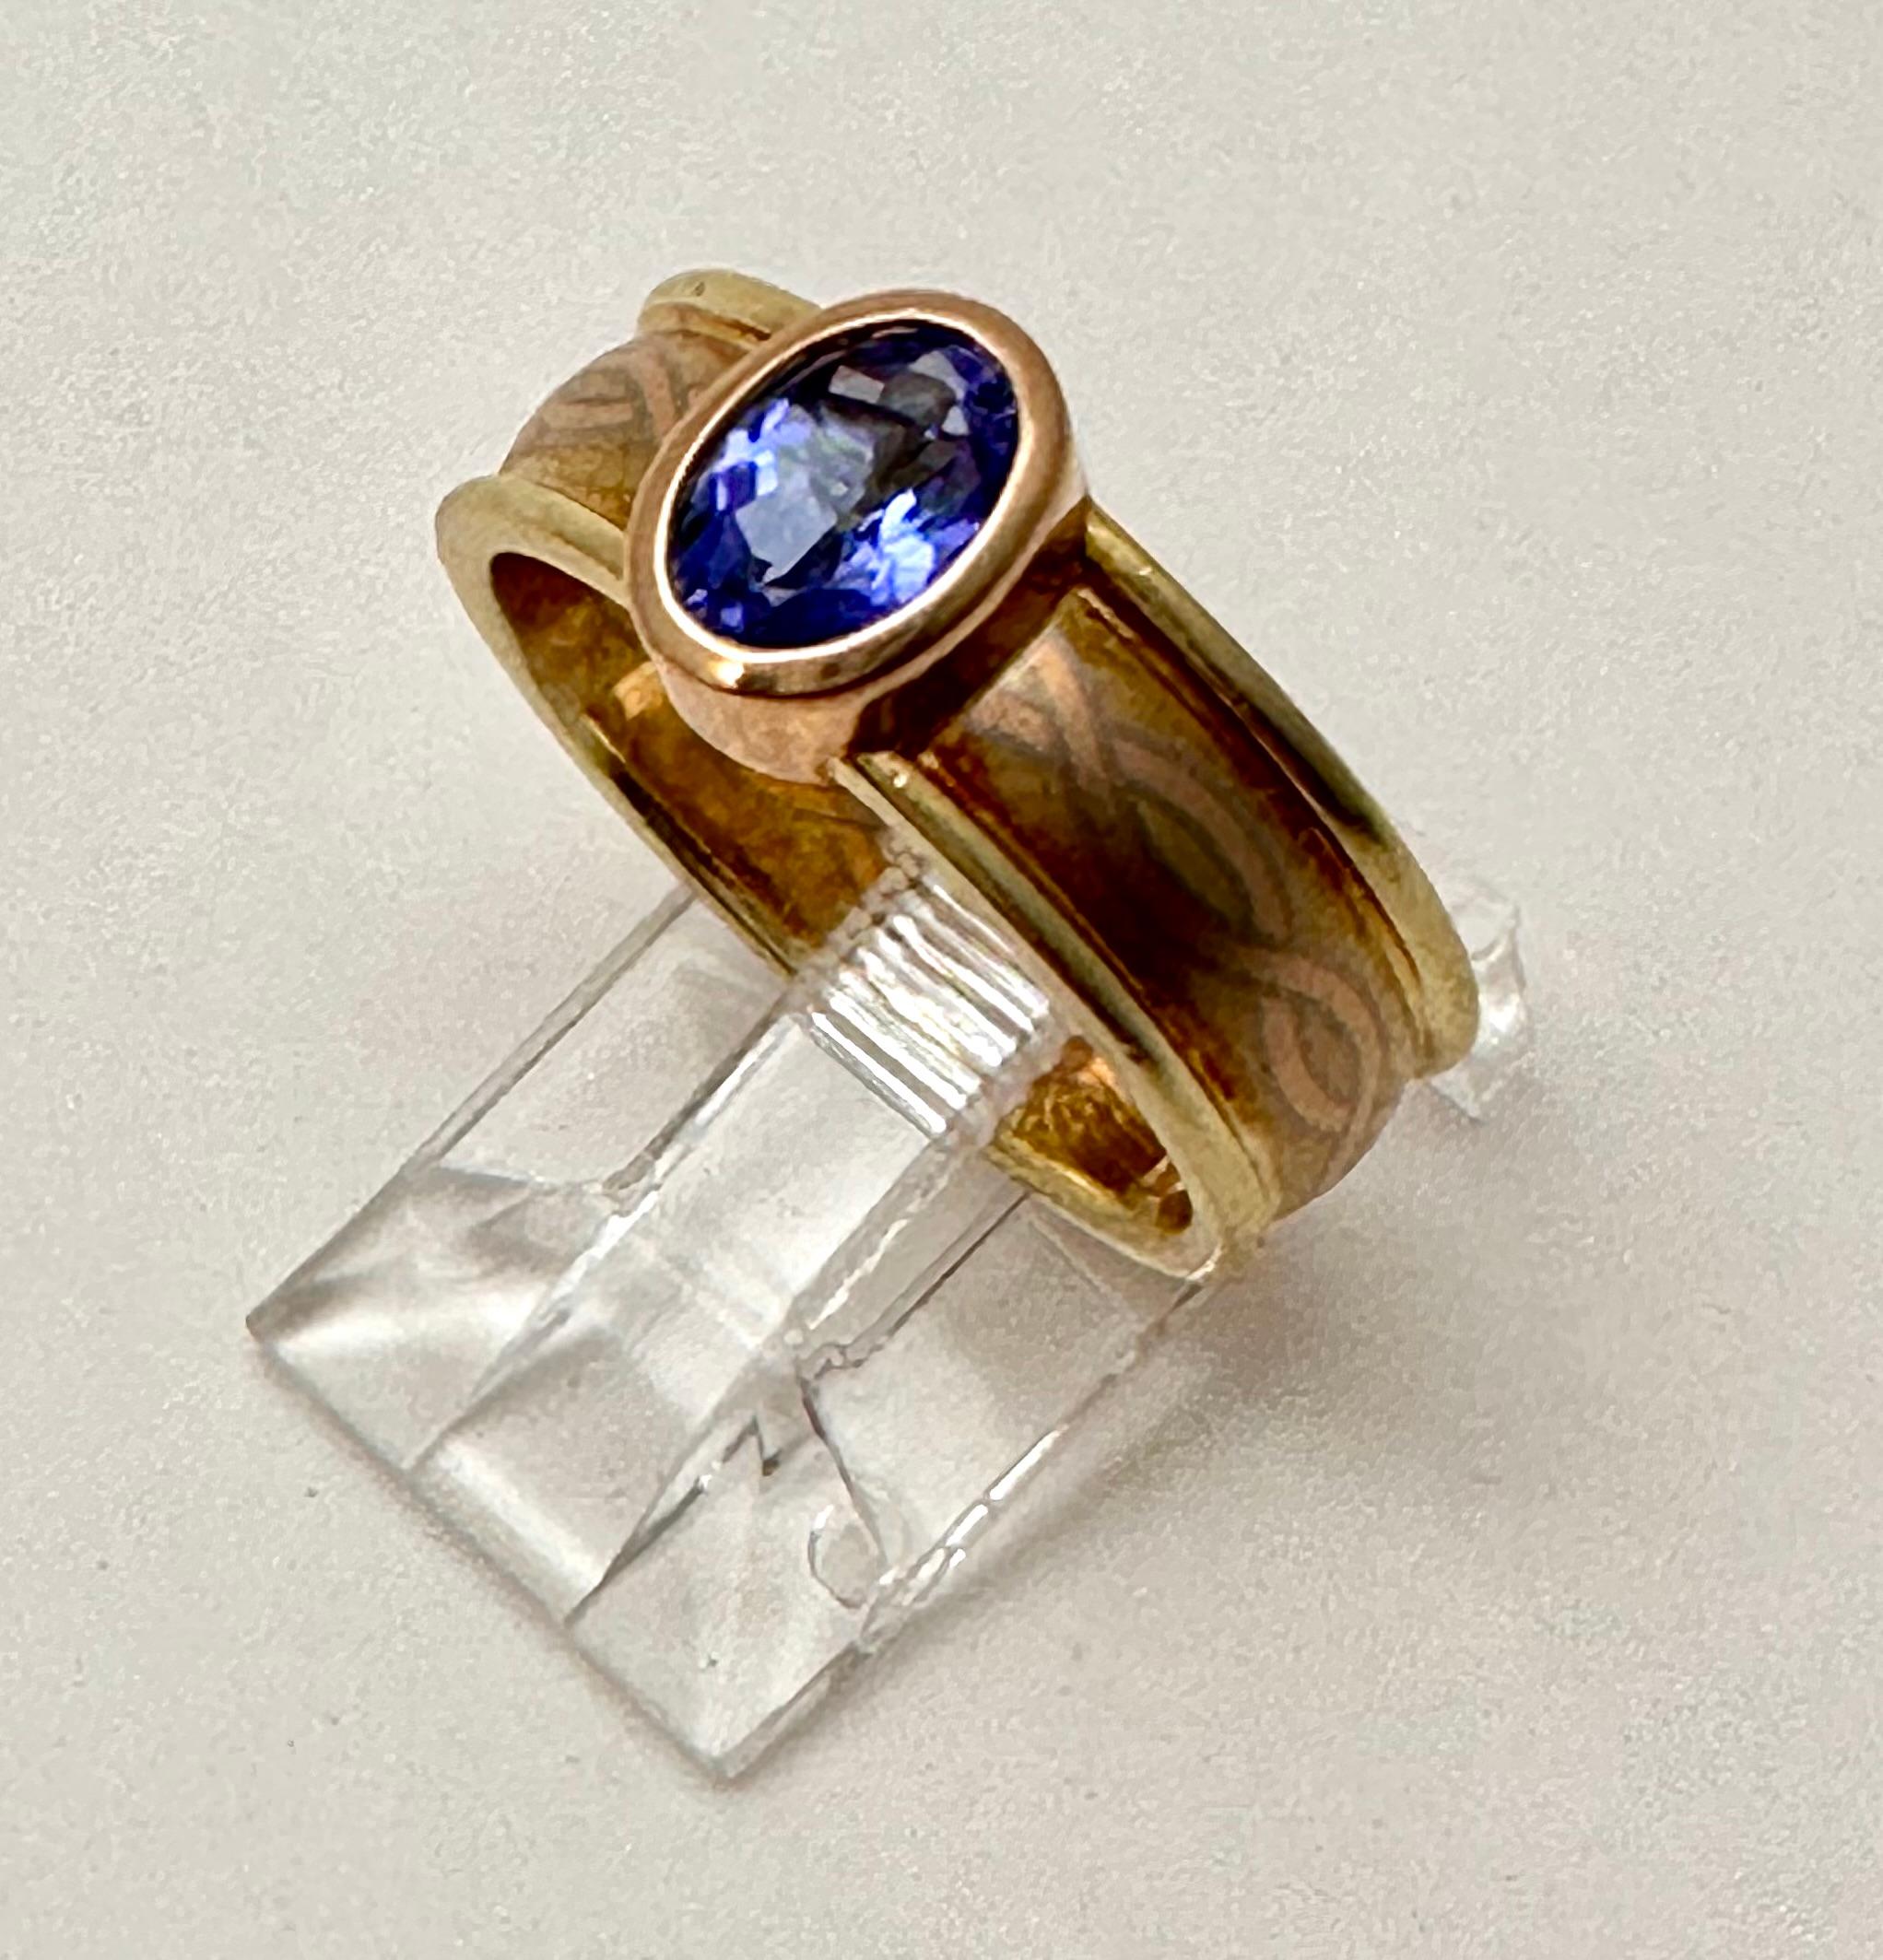 14k Yellow Gold 4.5mm x 6.5 Oval Cut Tanzanite Ring Size 7 In New Condition For Sale In Las Vegas, NV